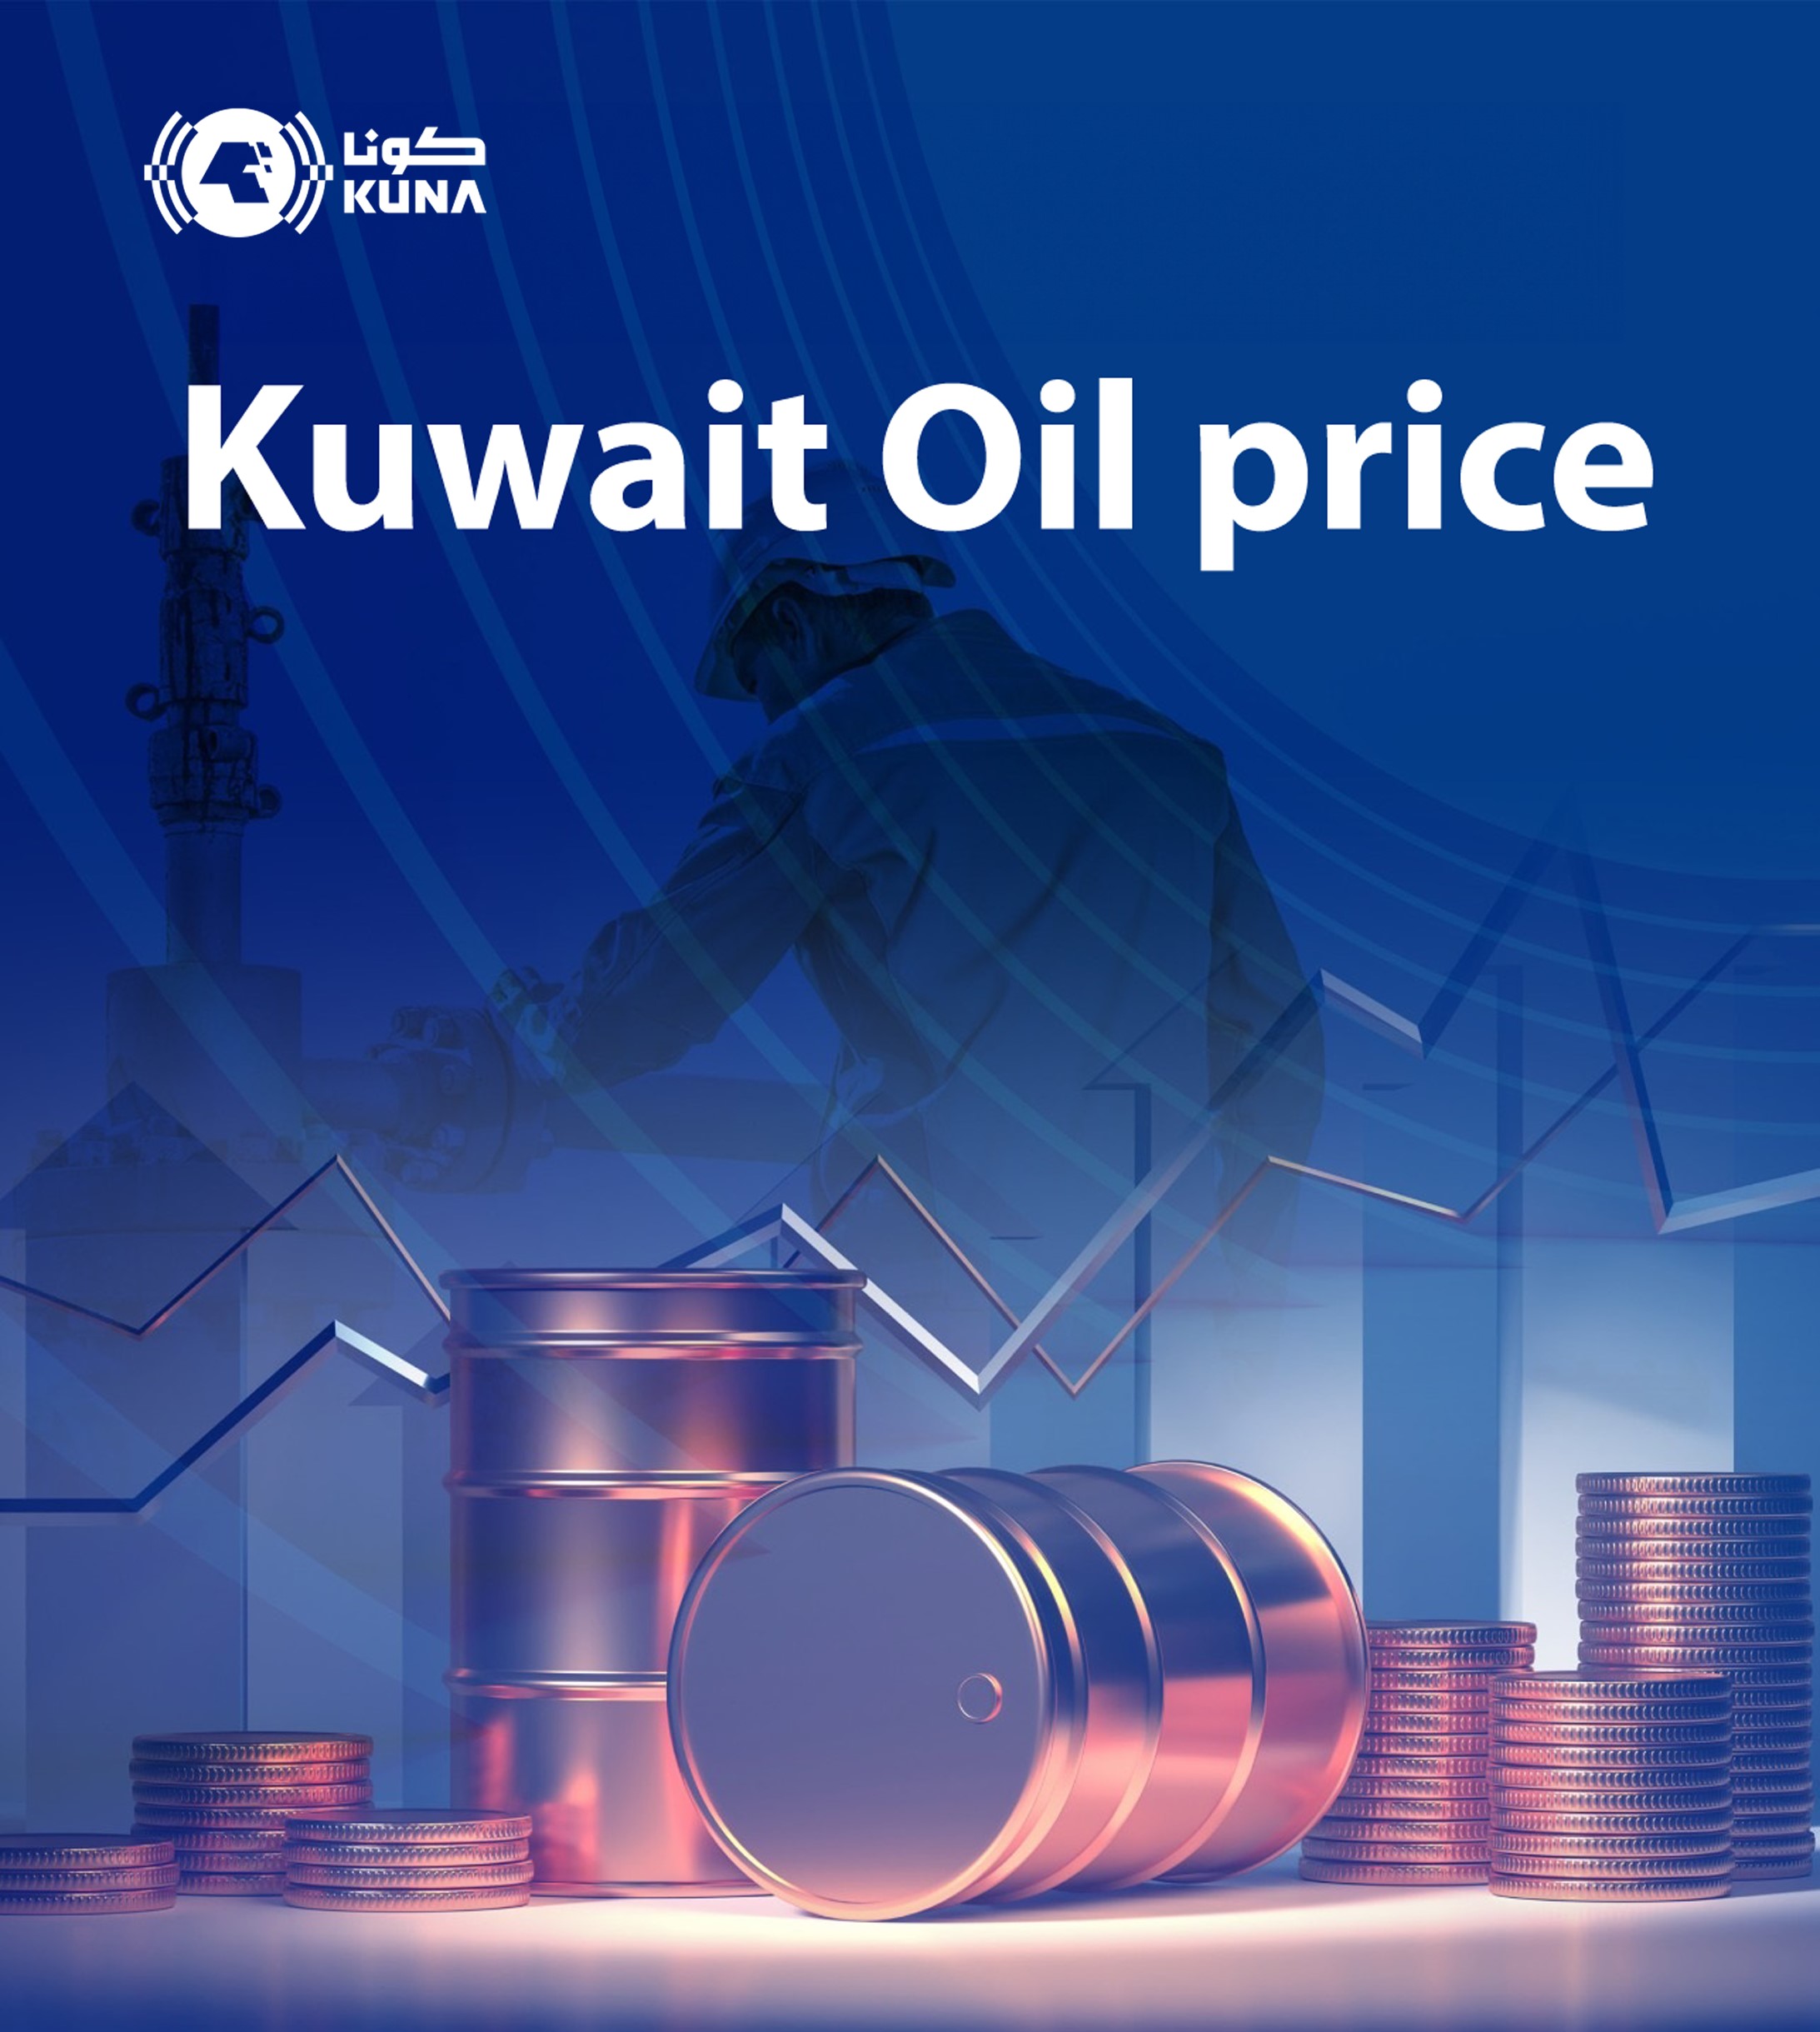 Kuwait oil price slightly down trading at USD 89.36 pb                                                                                                                                                                                                    